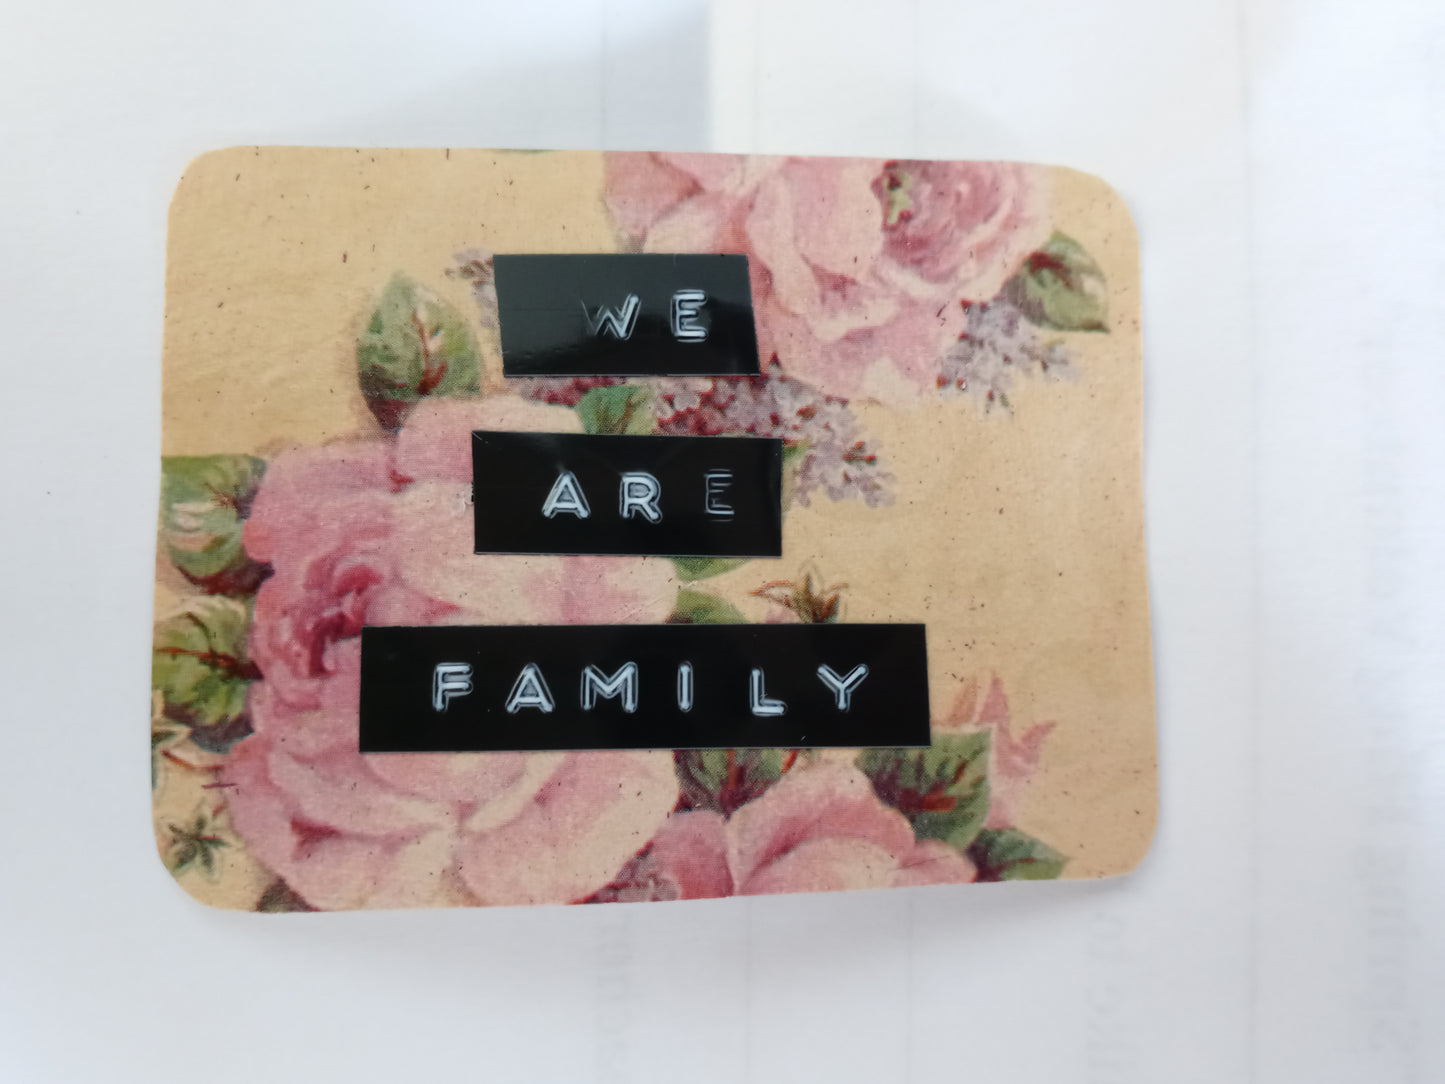 A handmade sticker in the shape of an irregular, rounded off rectangle with a floral background in beige, pink and green. Over top there are 3 lines of text made with a label maker that read "WE ARE FAMILY"